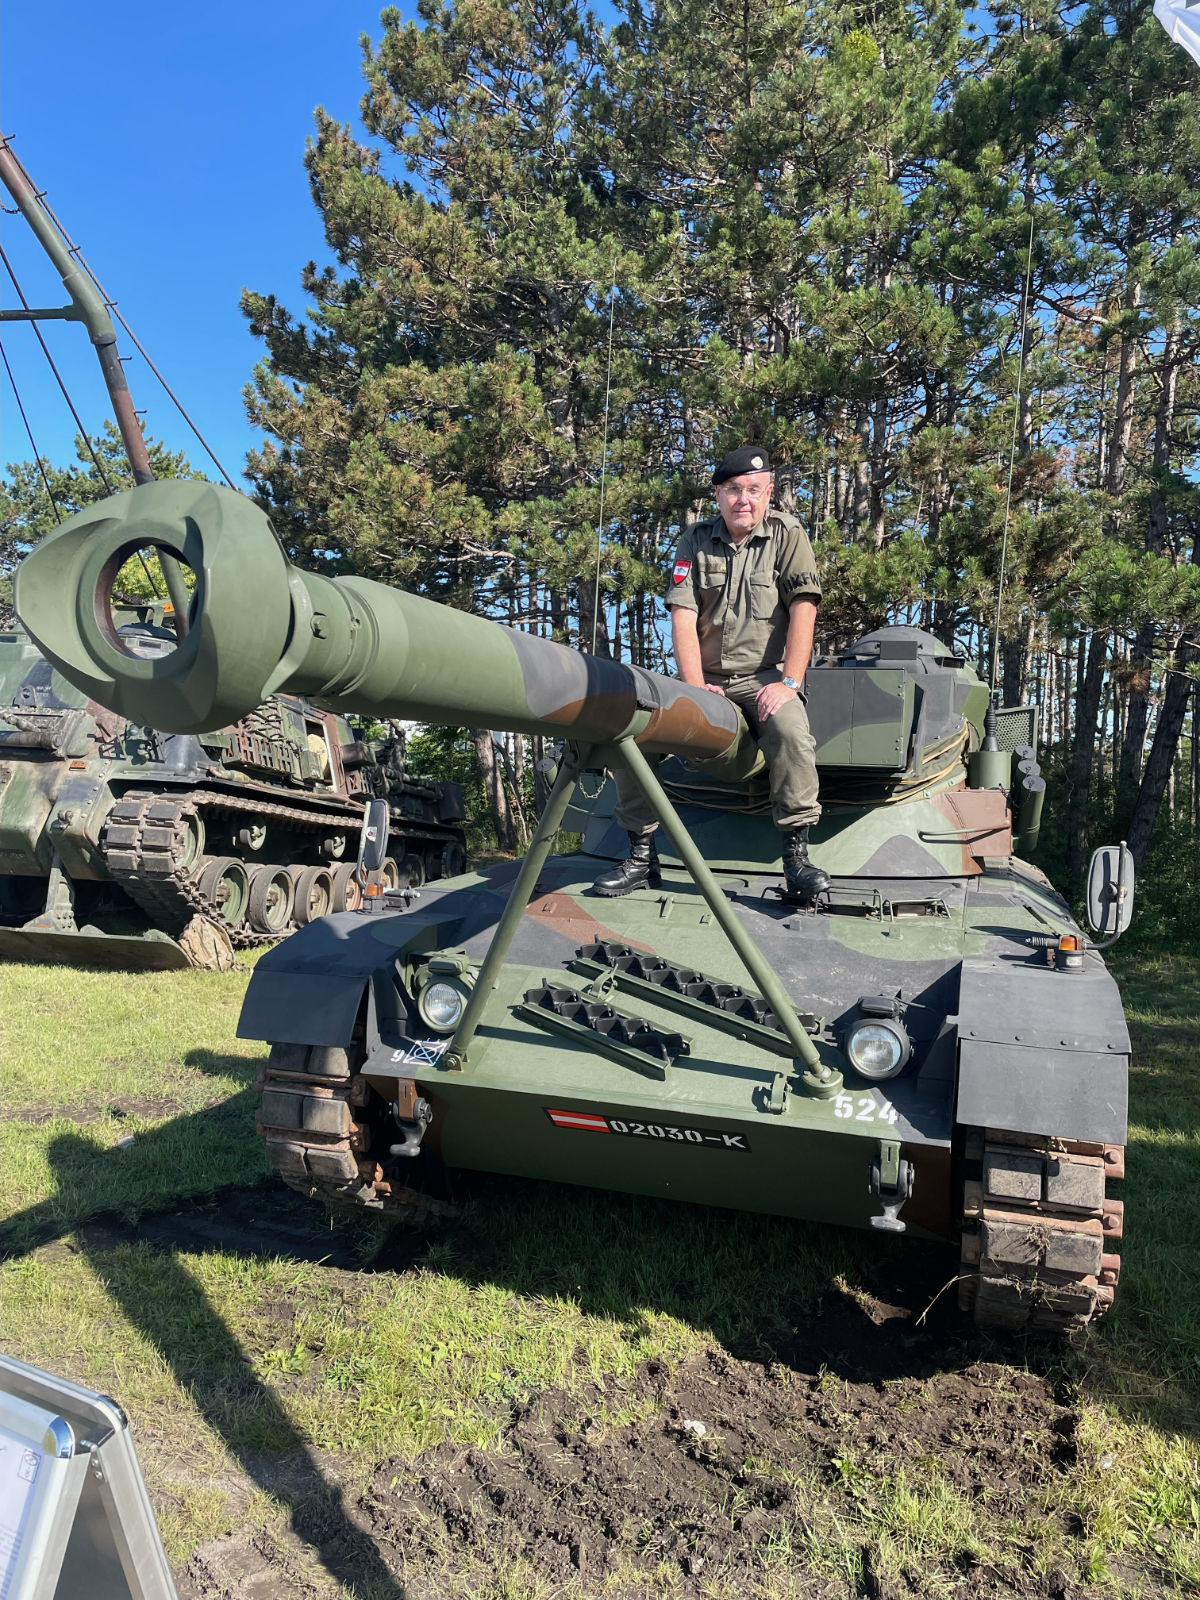 Open House Day at the 35th Tank Grenadier Battalion in Grossmittel